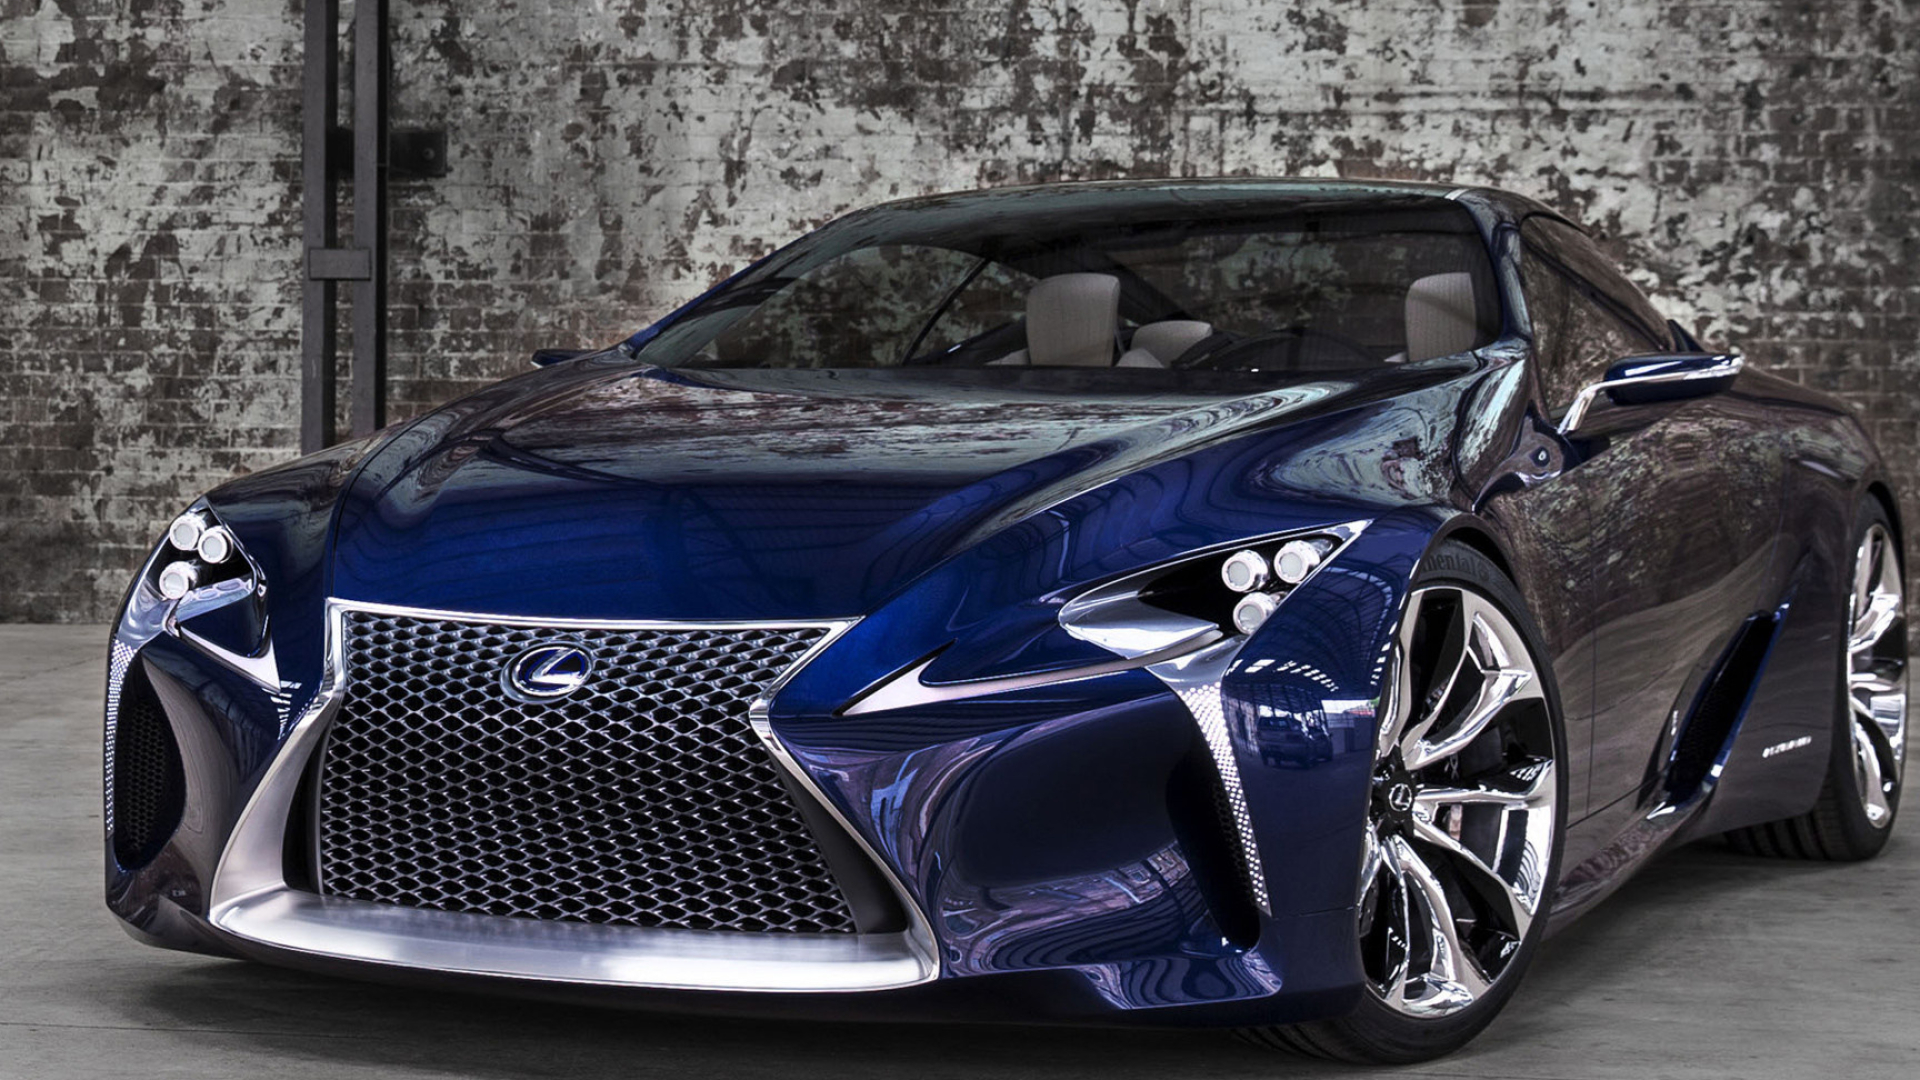 Lexus LC, High-resolution wallpapers, Unmatched elegance, Automotive artistry, 1920x1080 Full HD Desktop